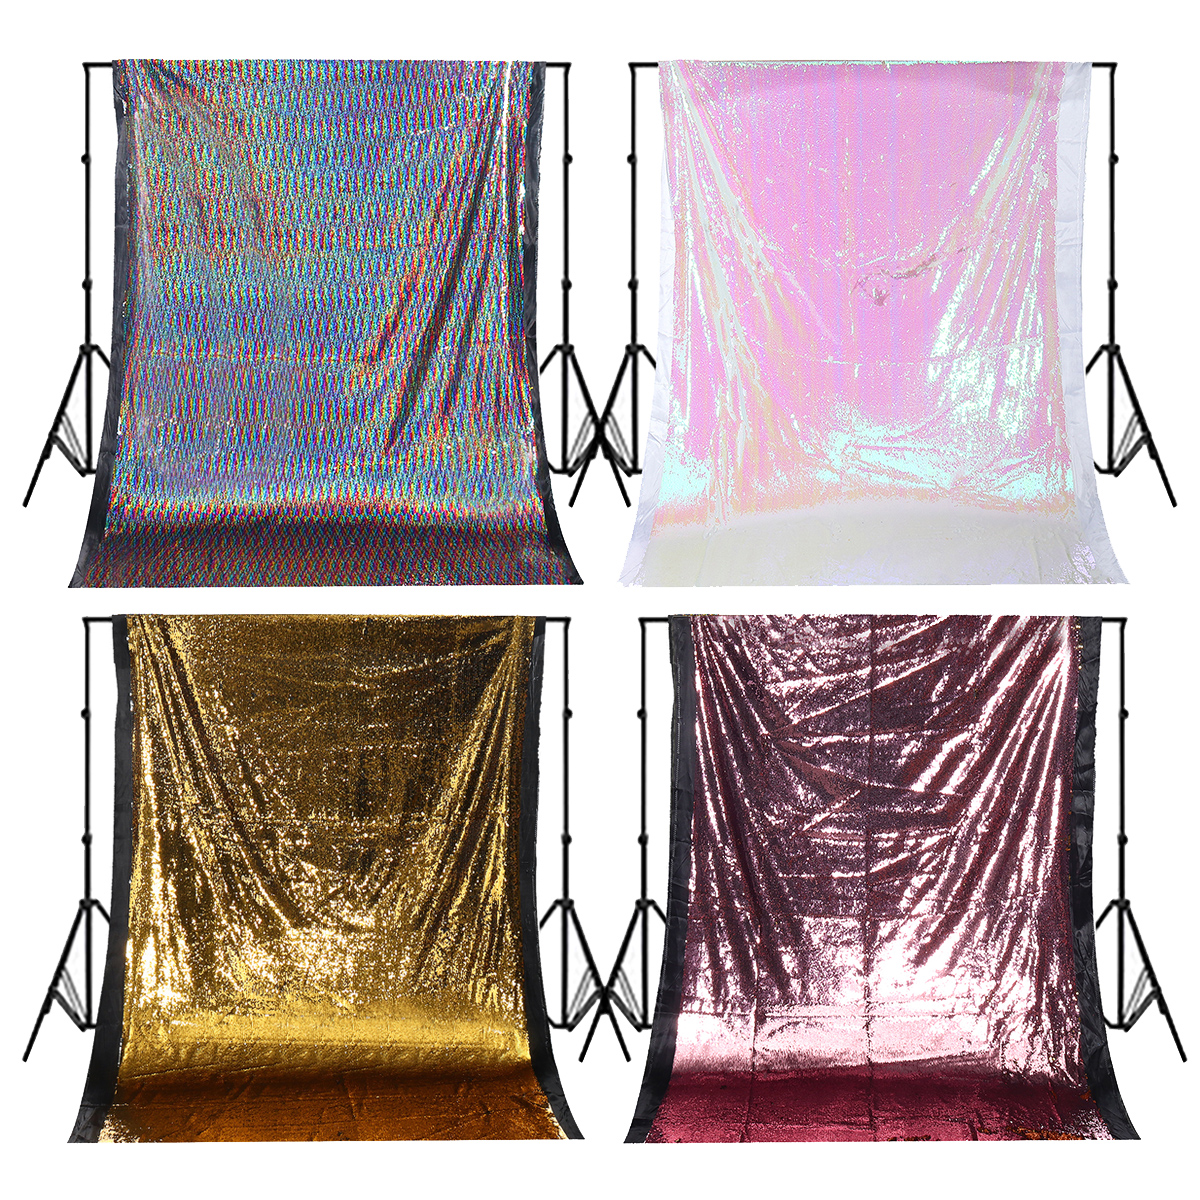 13x19m-Glitter-Sequin-Fabric-Photography-Backdrop-Curtain-Wedding-Party-Decor-1627473-1